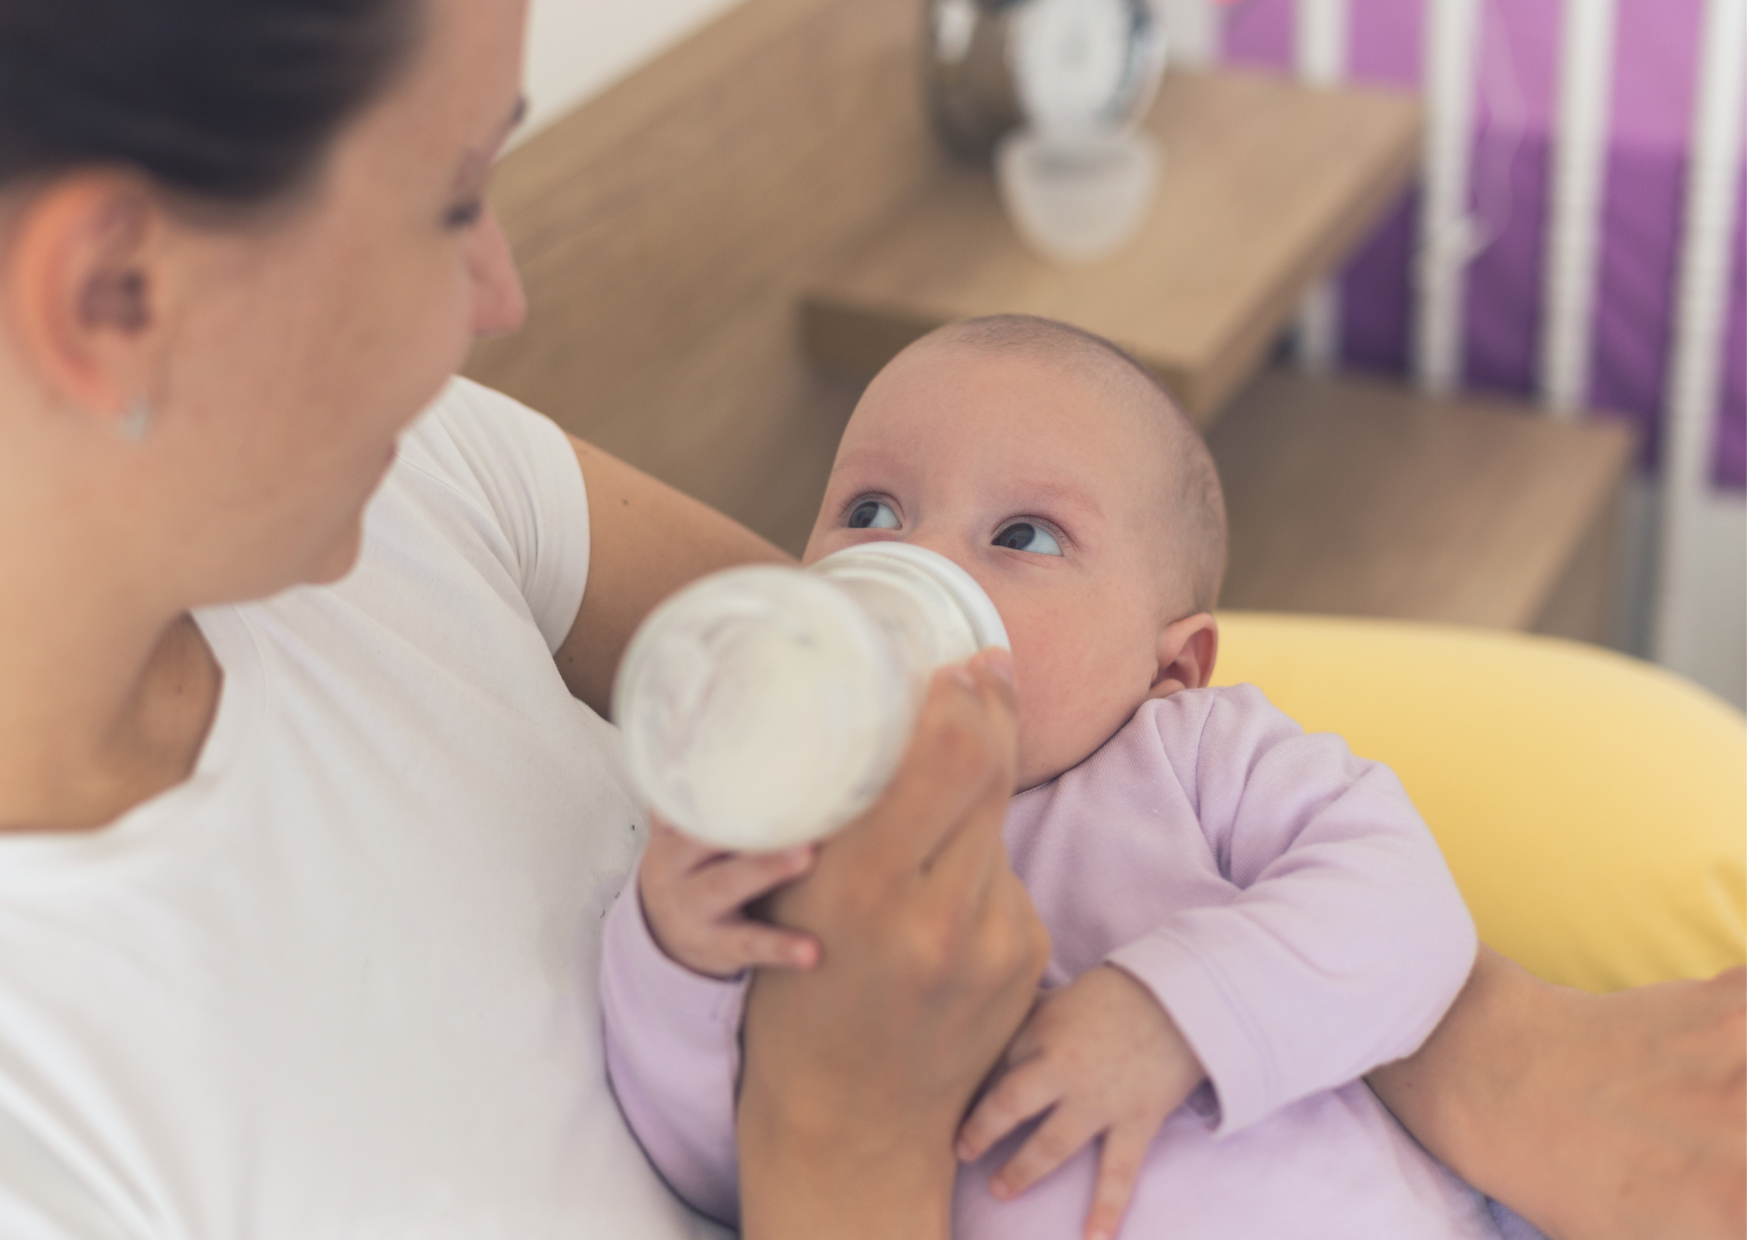 how to safely prepare baby formula